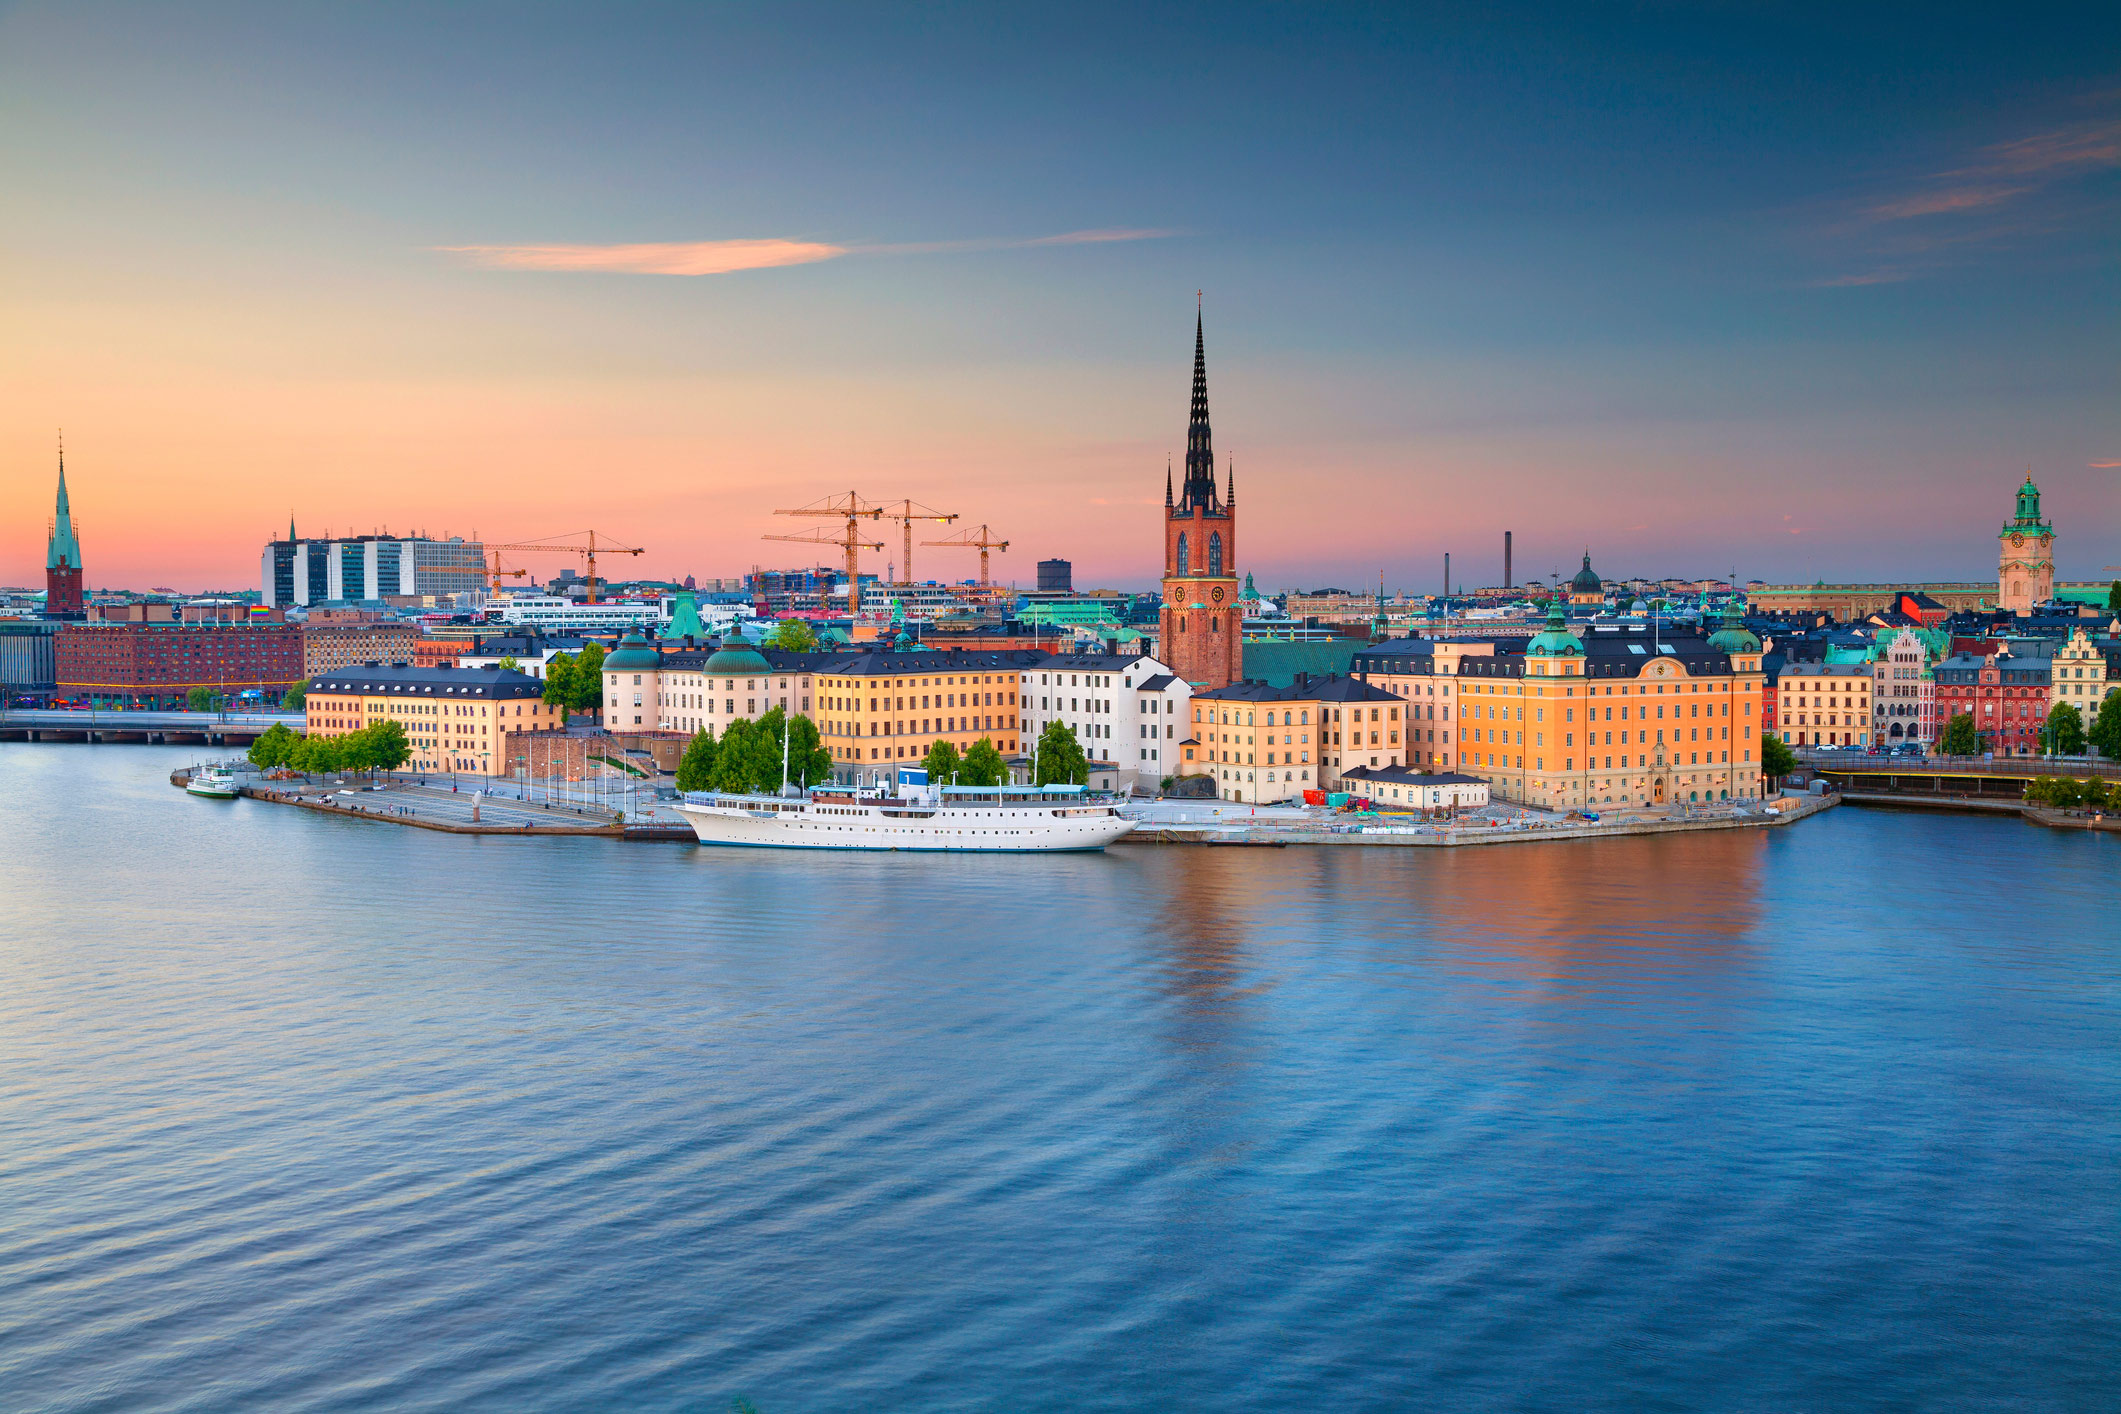 Stockholm like other Nordic cities has piqued investor interest